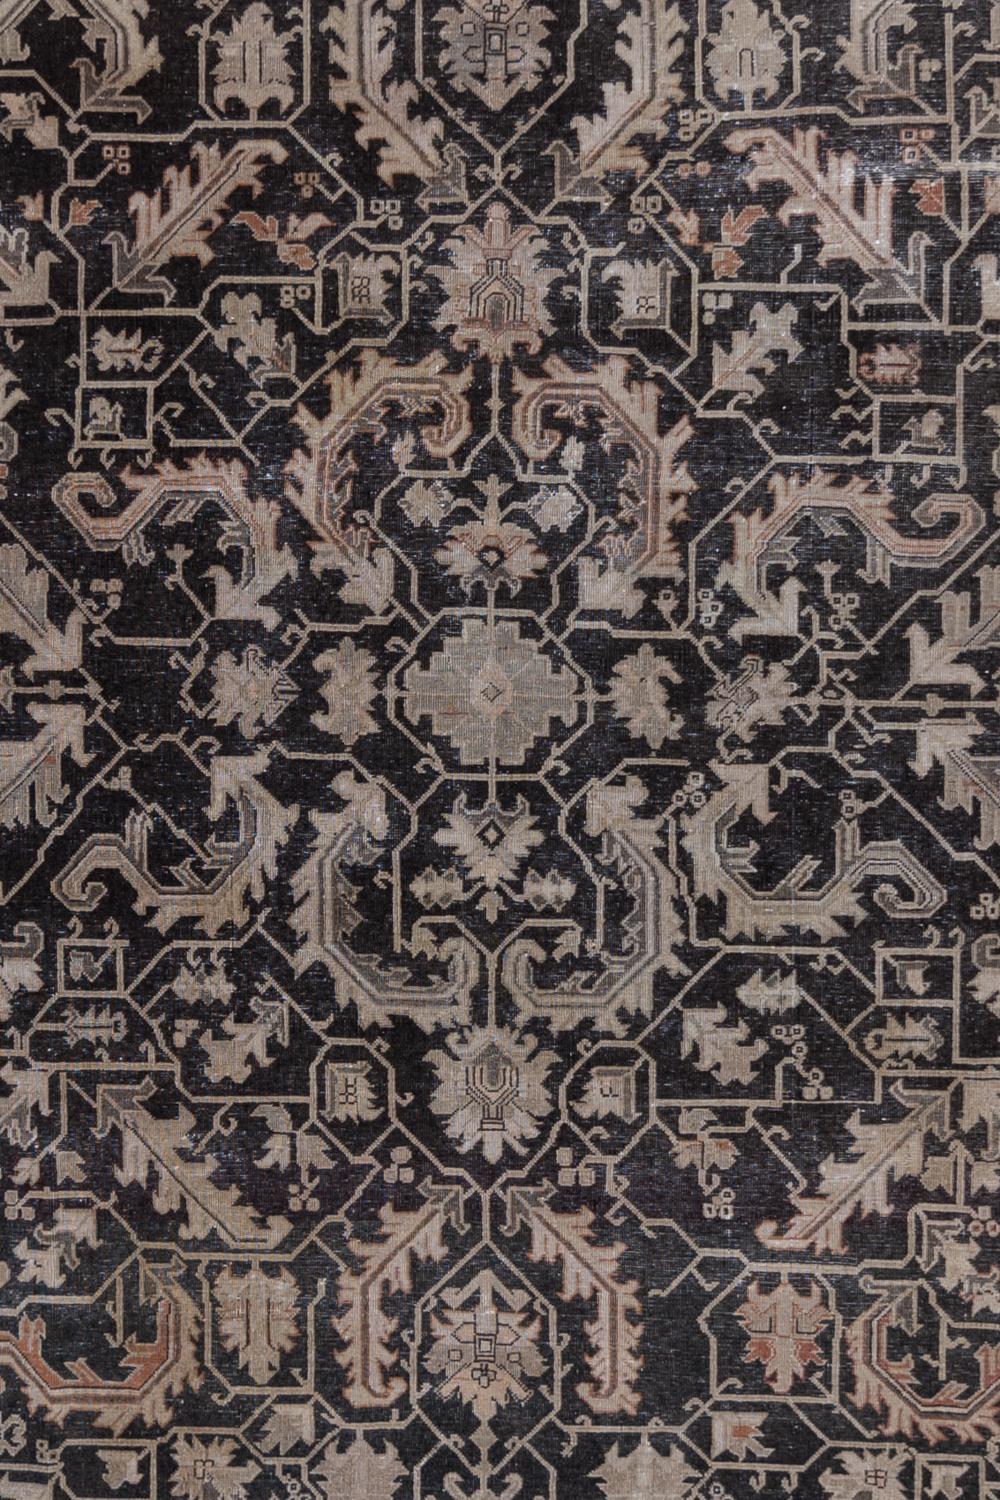 Age: Circa 1940

Colors: dark blue-black (faded black), taupe, salmon accents, mushroom

Pile: low

Wear Notes: 2

Material: wool on cotton

Vintage Persian Tabriz with a dark field and geometric leaves in various shades of light gray